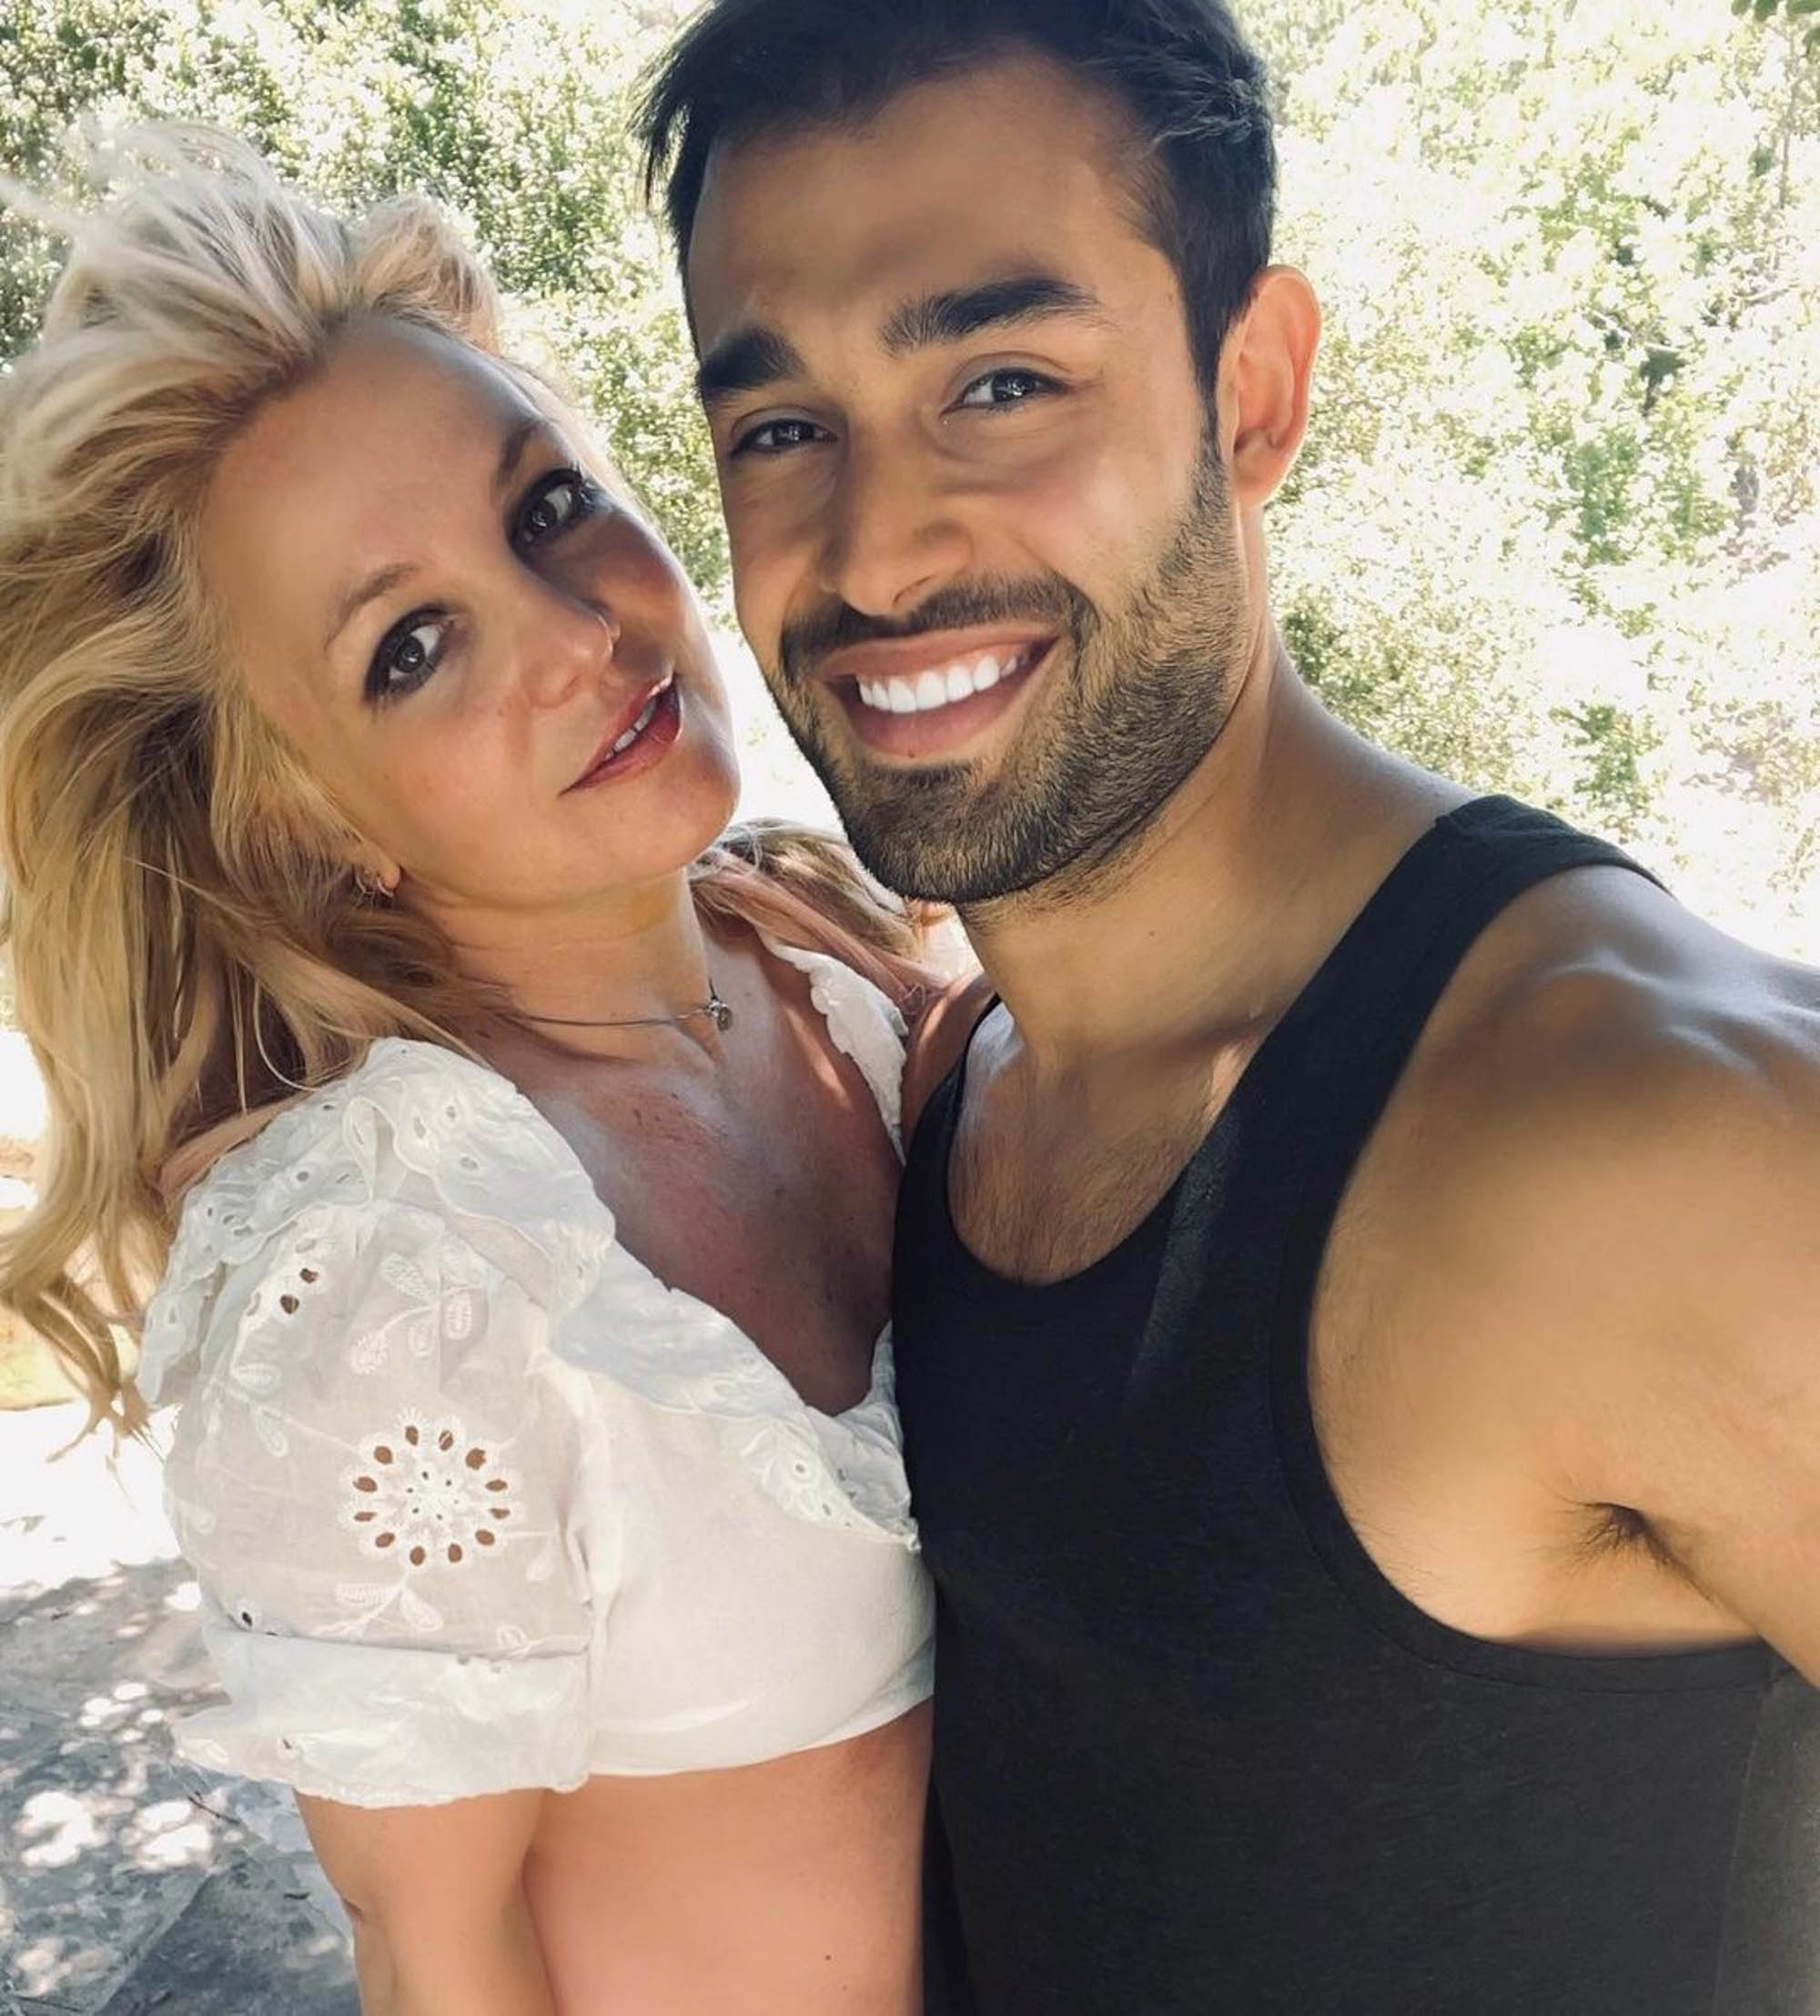 Asghari and Spears celebrated their first year of marriage on June 9.